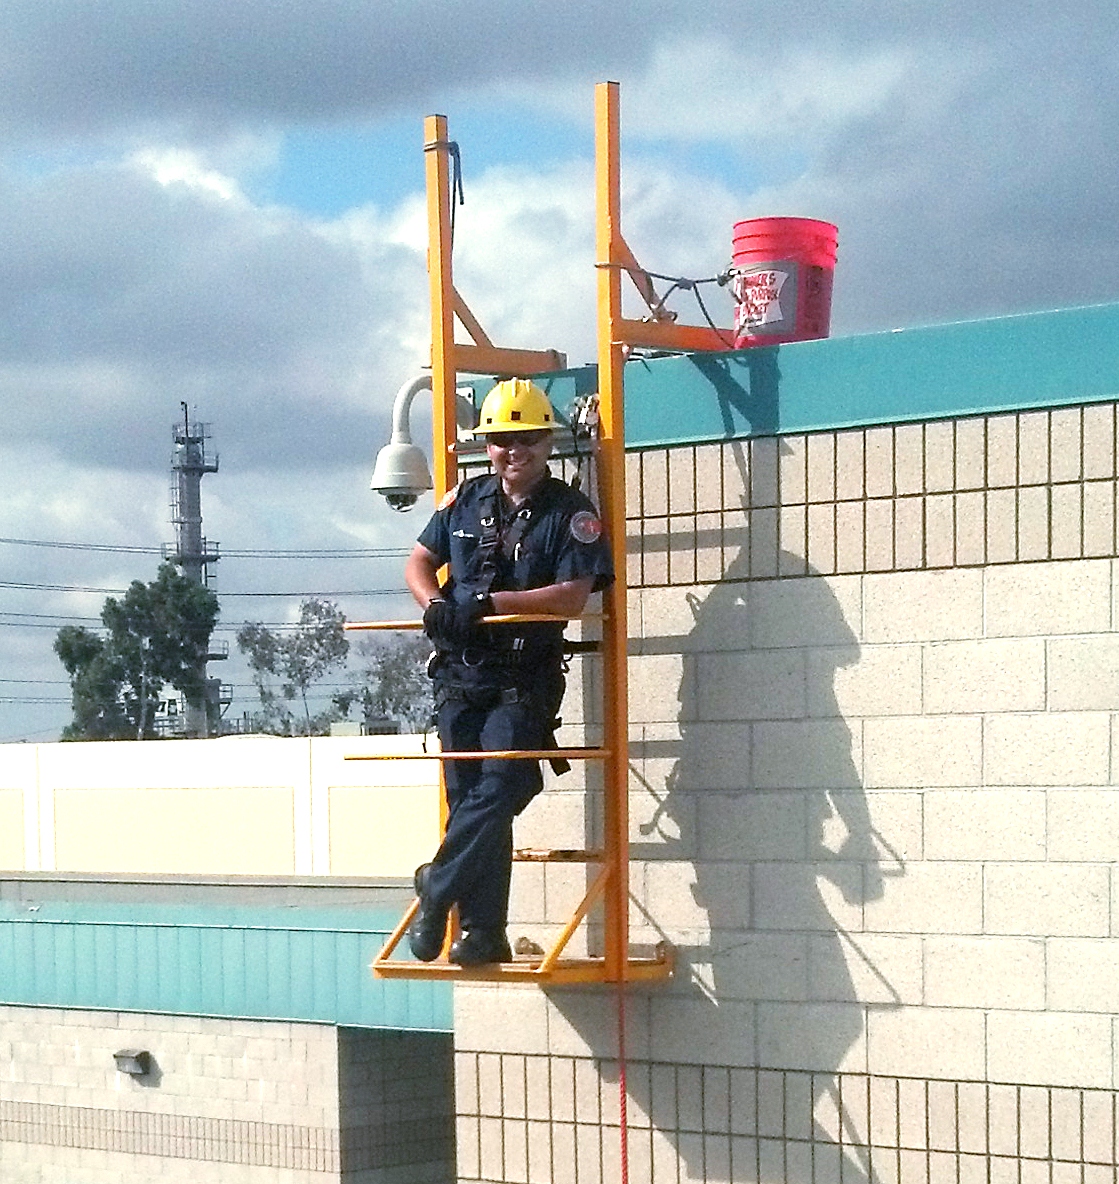 Designed and fabricated a parapet ladder to hang off the side of the building to install security cameras.